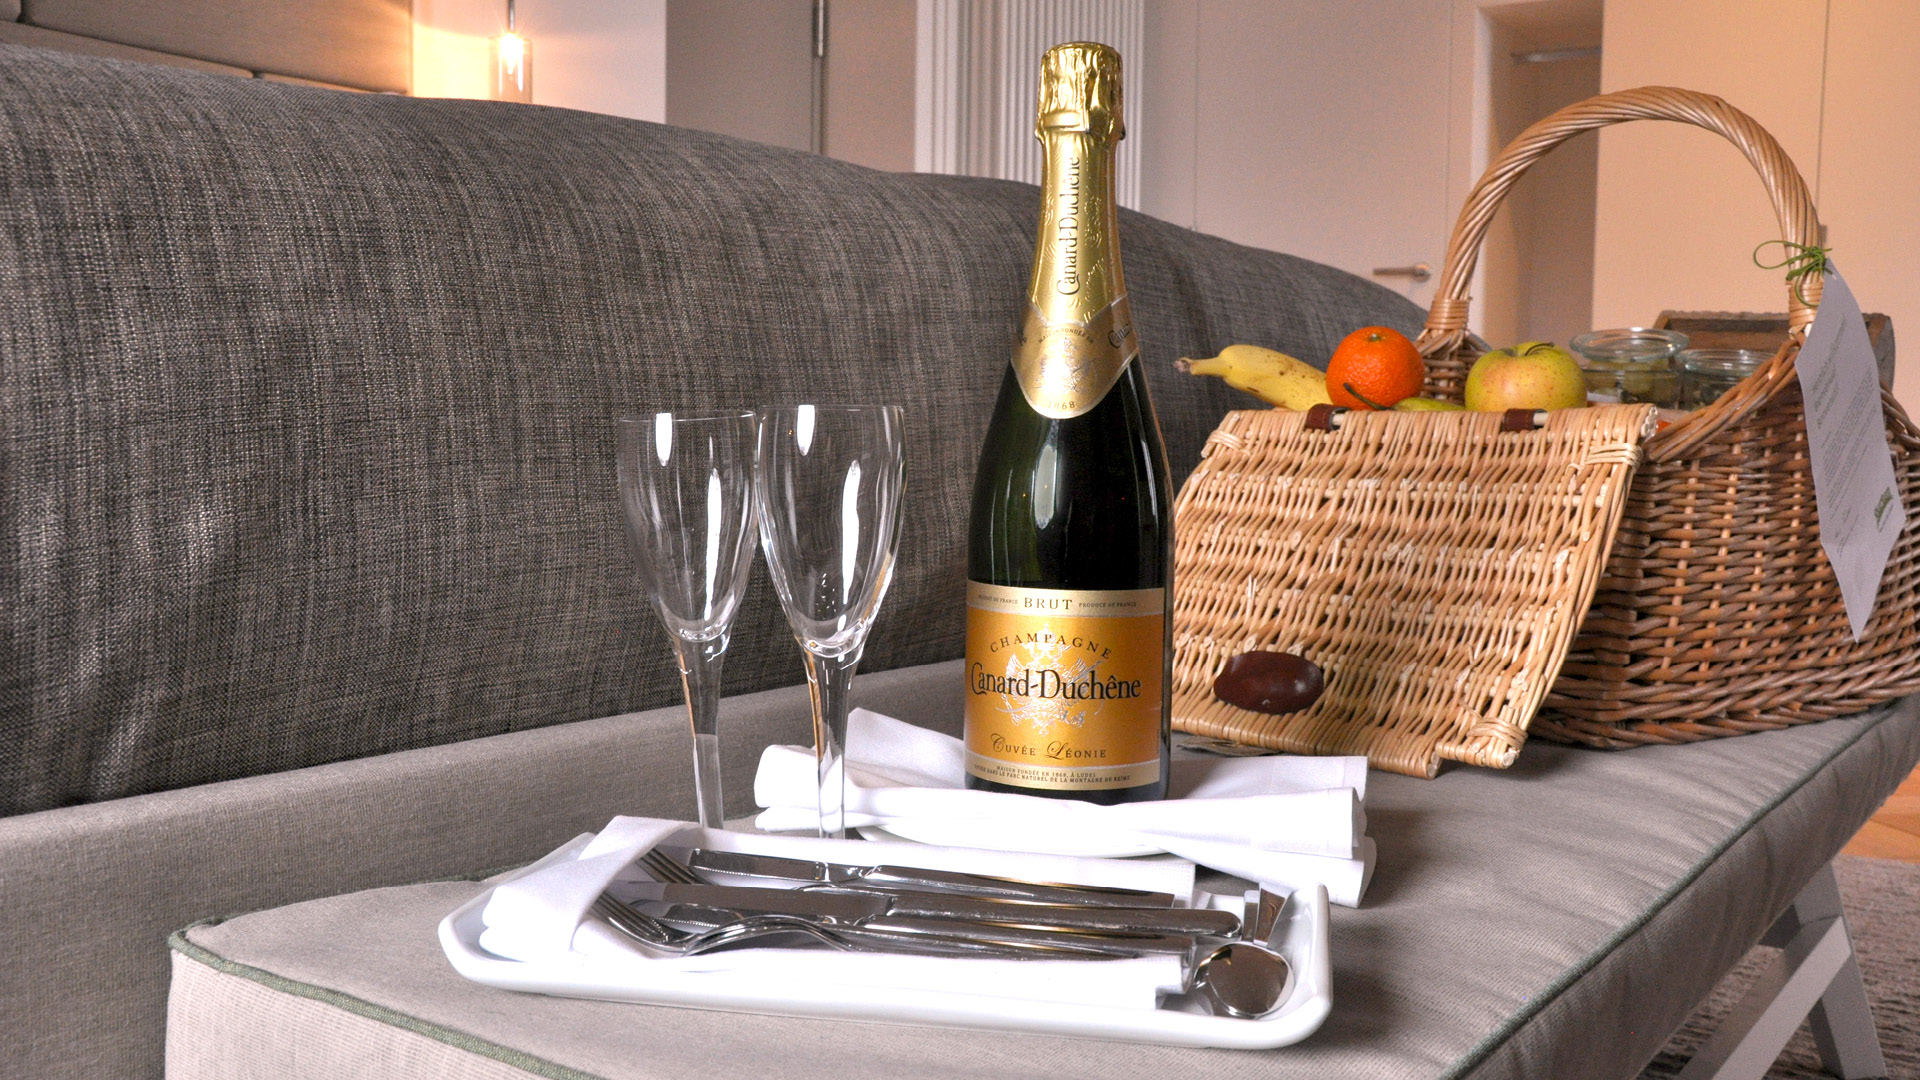 Champagne with two glasses and a picnic basket for a romantic time.